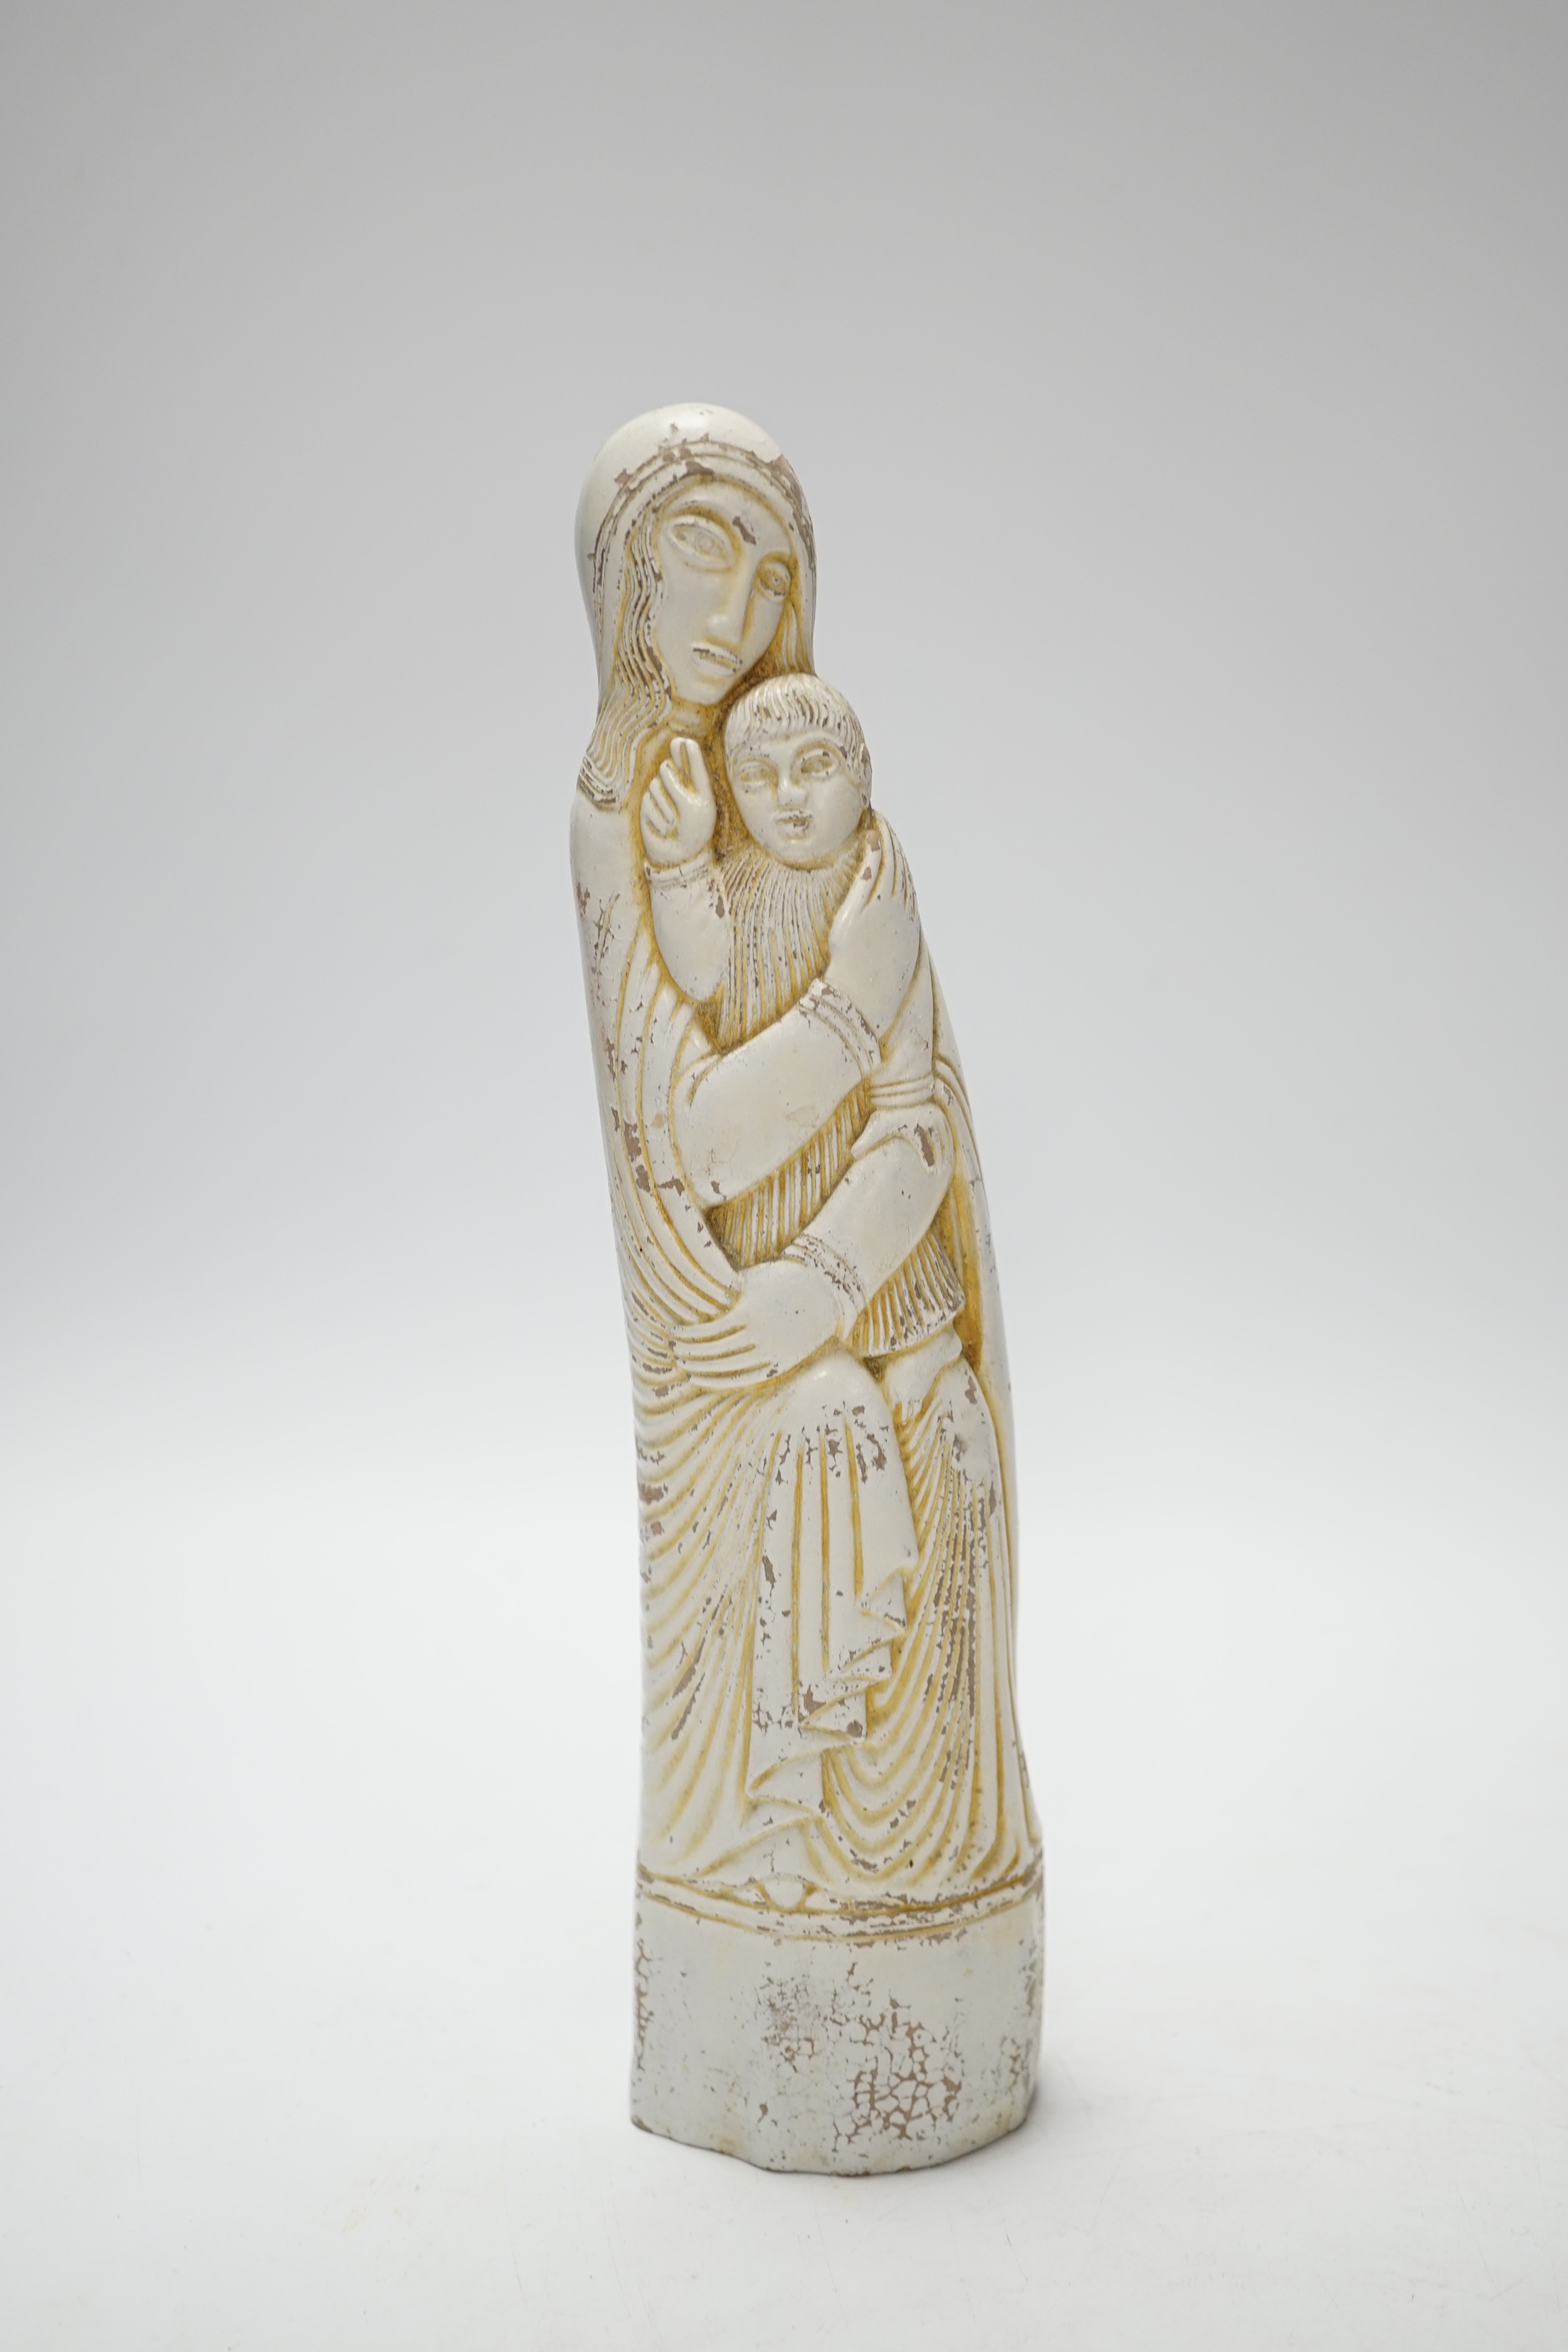 An Eric Gill sculpture of Madonna and child and a carriage timepiece, sculpture 23cm high